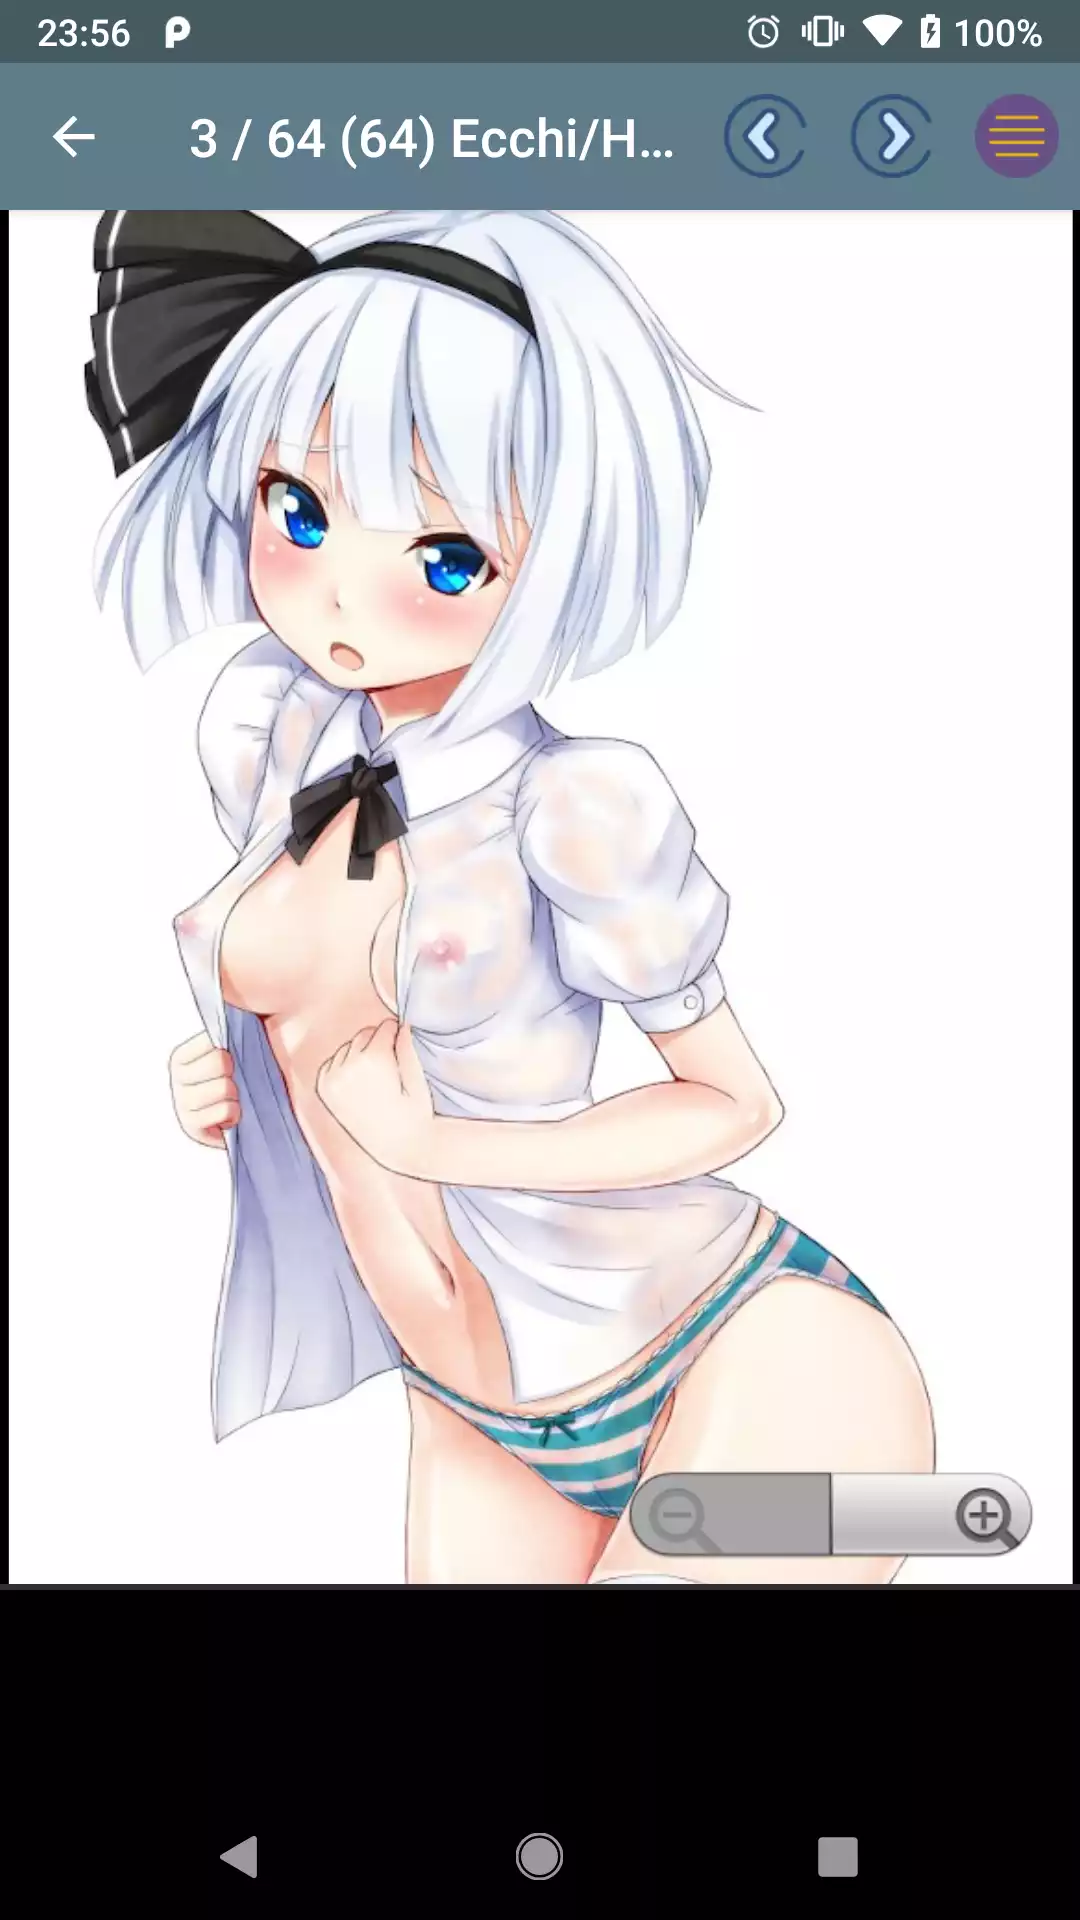 Hentai Galleries Packs mobile,photos,pegging,series,sexy,puzzle,drawings,galleries,hentai,pictures,for,images,hentaimanga,hentia,anime,gallery,pics,pornstar,porn,app,games,girls